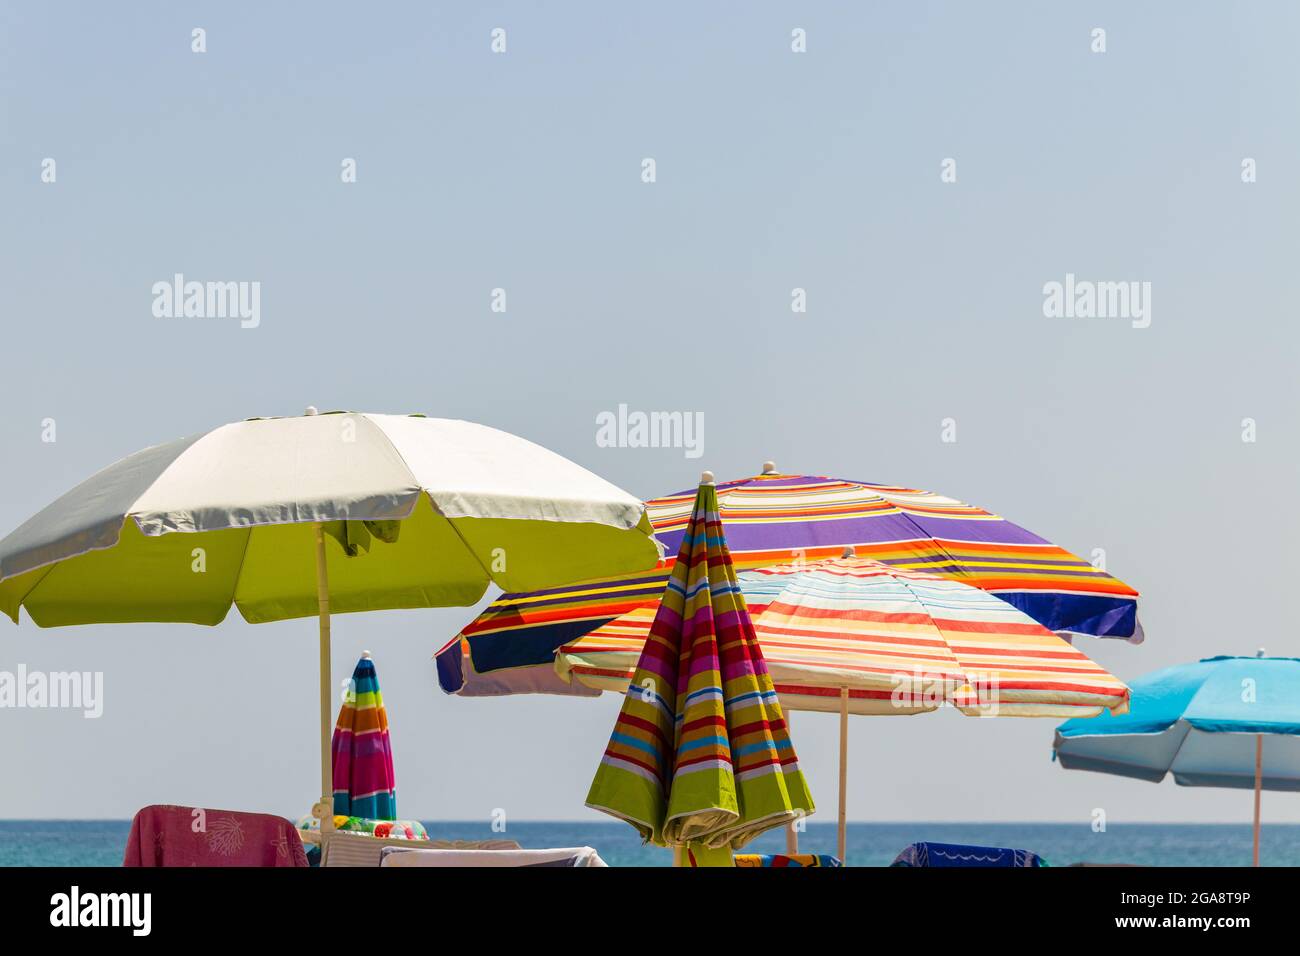 Colorful umbrellas on the beach during a sunny day with blue skies Stock Photo